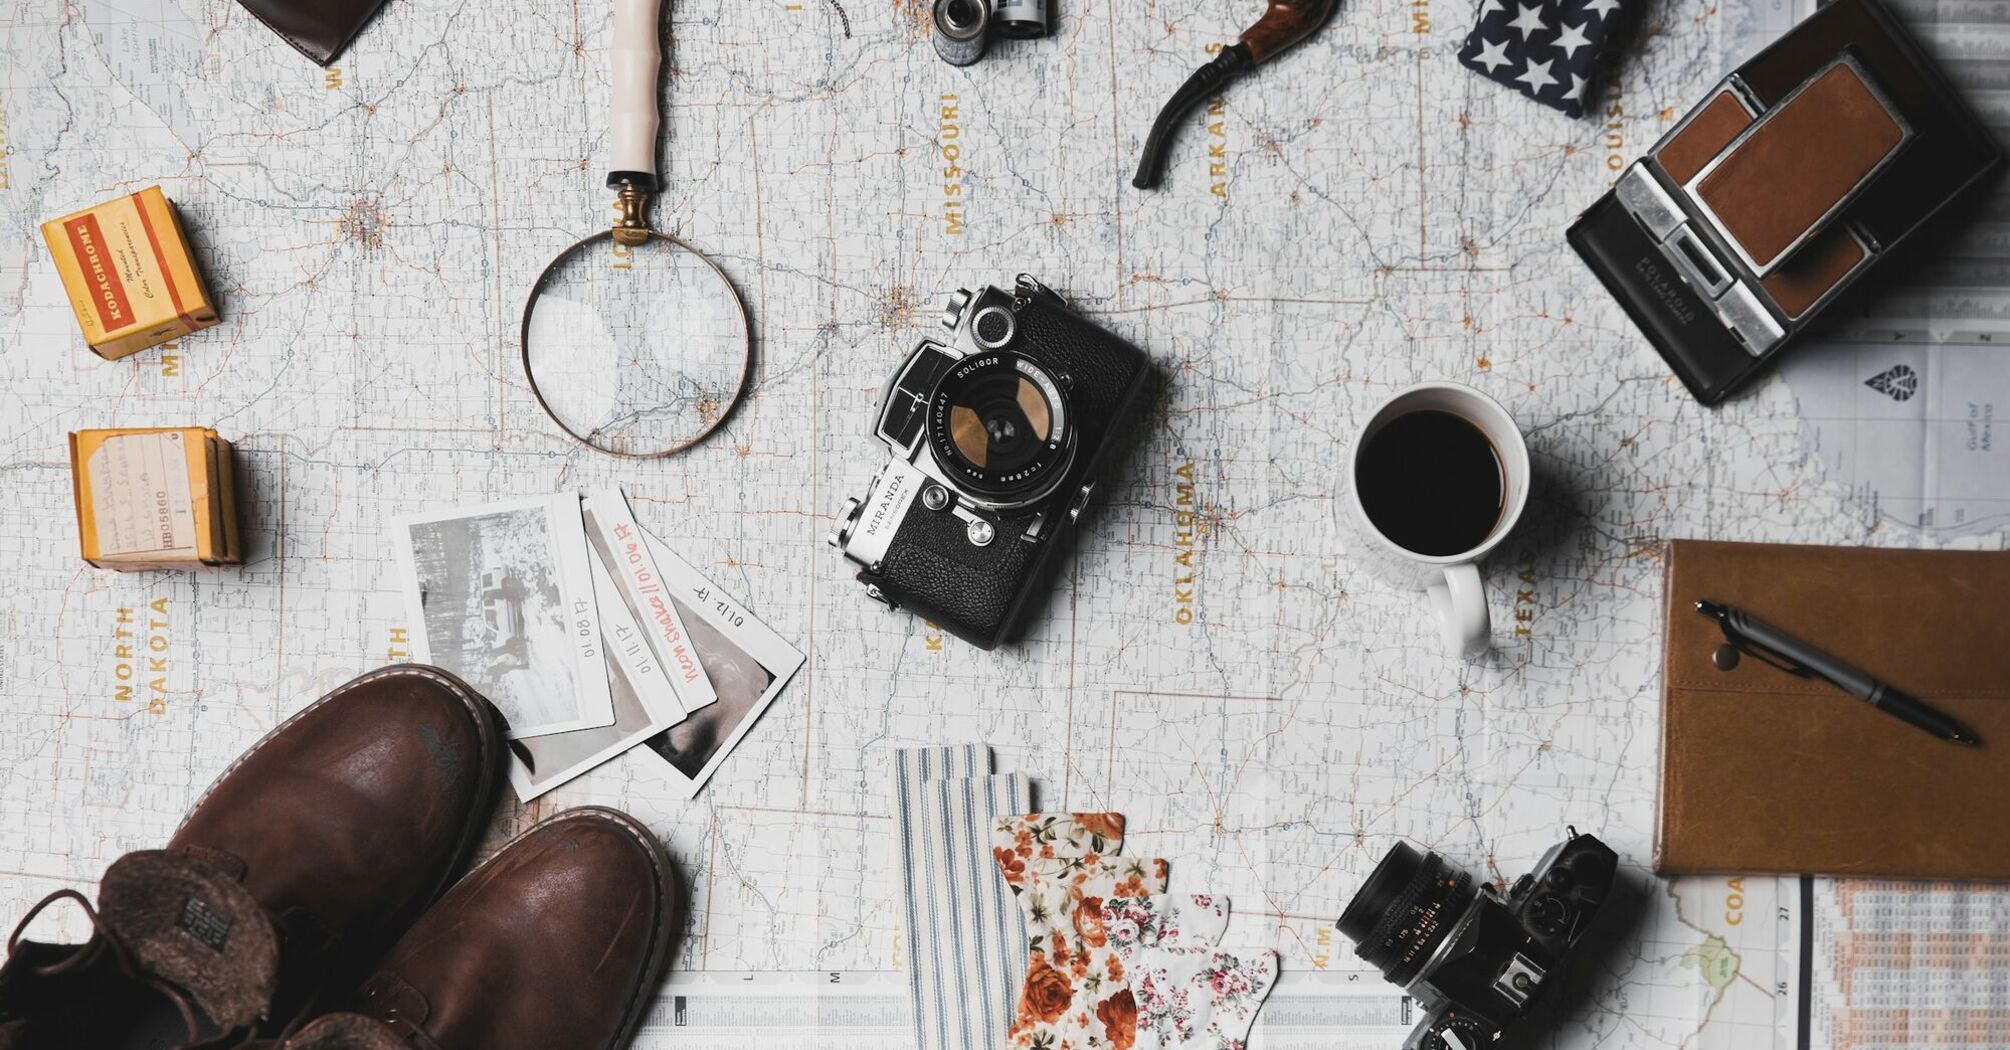 Travel essentials laid out on a map, including a camera, magnifying glass, boots, and a coffee cup